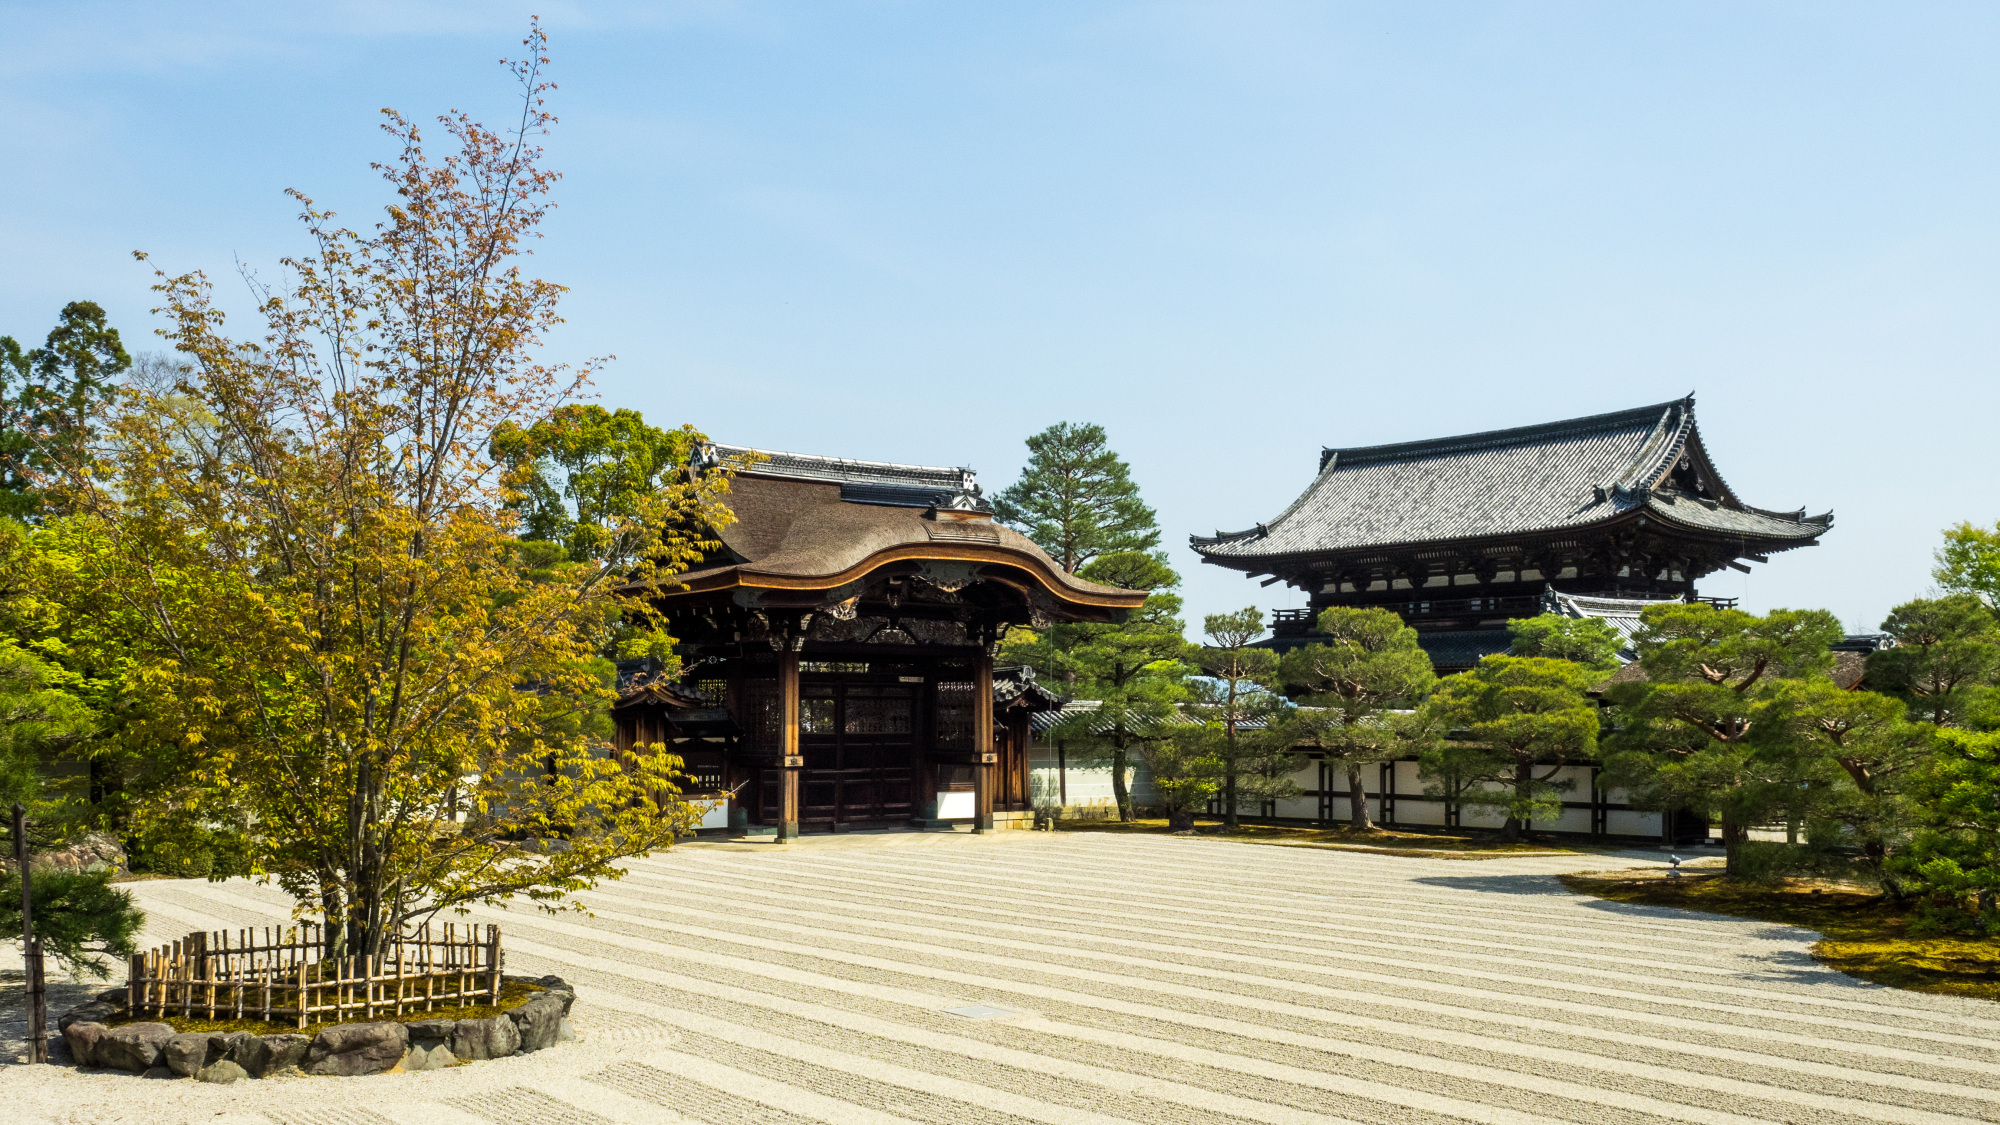 Cultural escape: A view of Ninnaji temple's rock garden. Visitors can book an imperial room at Ninnaji to listen to traditional Japanese music and Buddhist chanting. | AJAY SURESH, VIA WIKIMEDIA COMMONS / CC BY 2.0